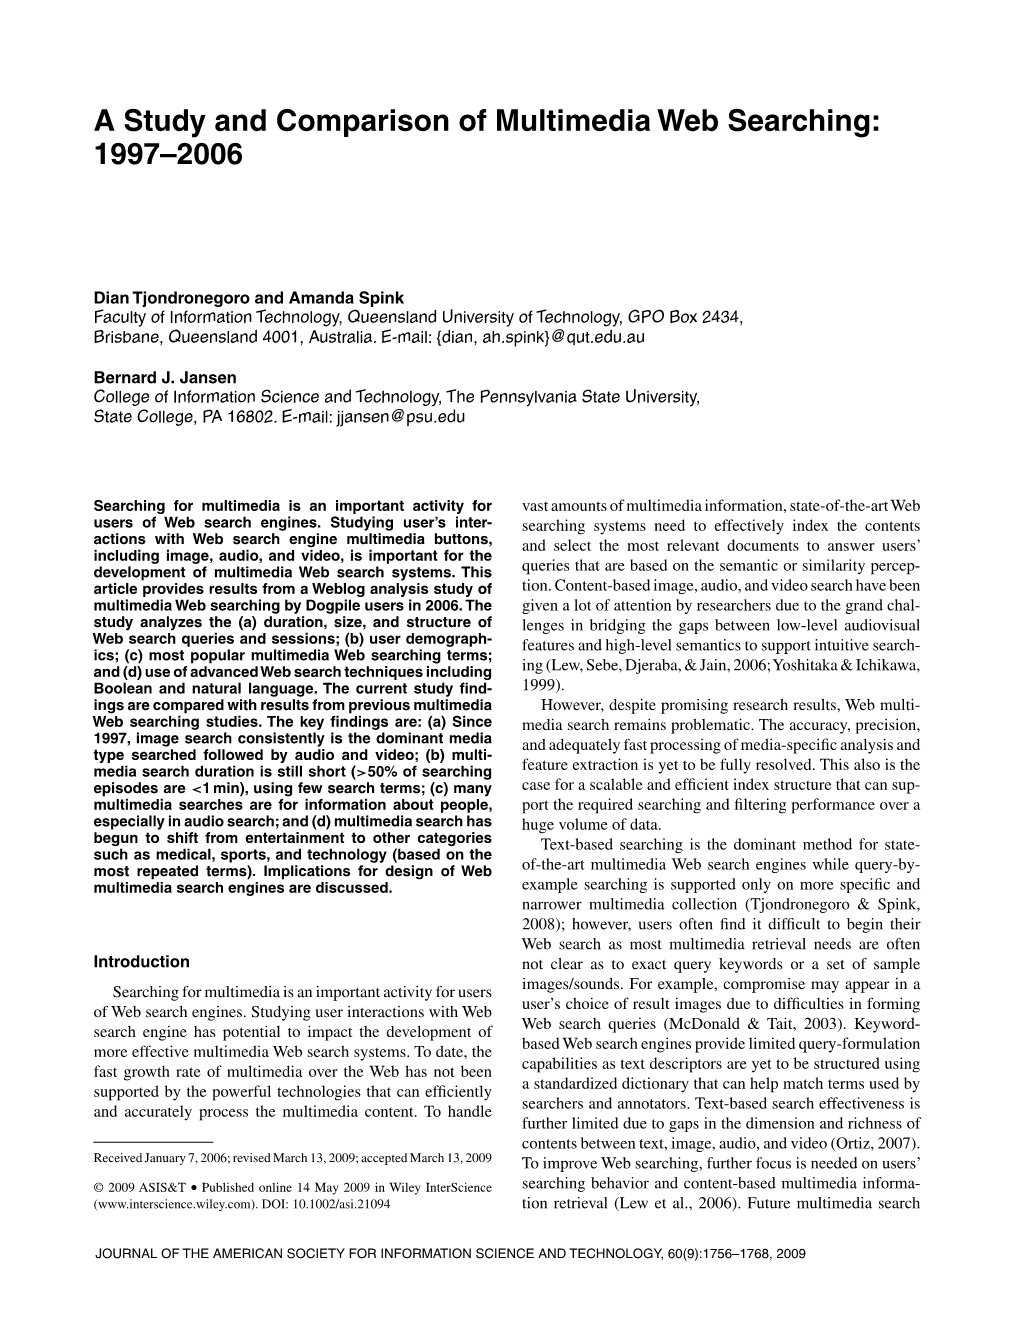 A Study and Comparison of Multimedia Web Searching: 1997–2006